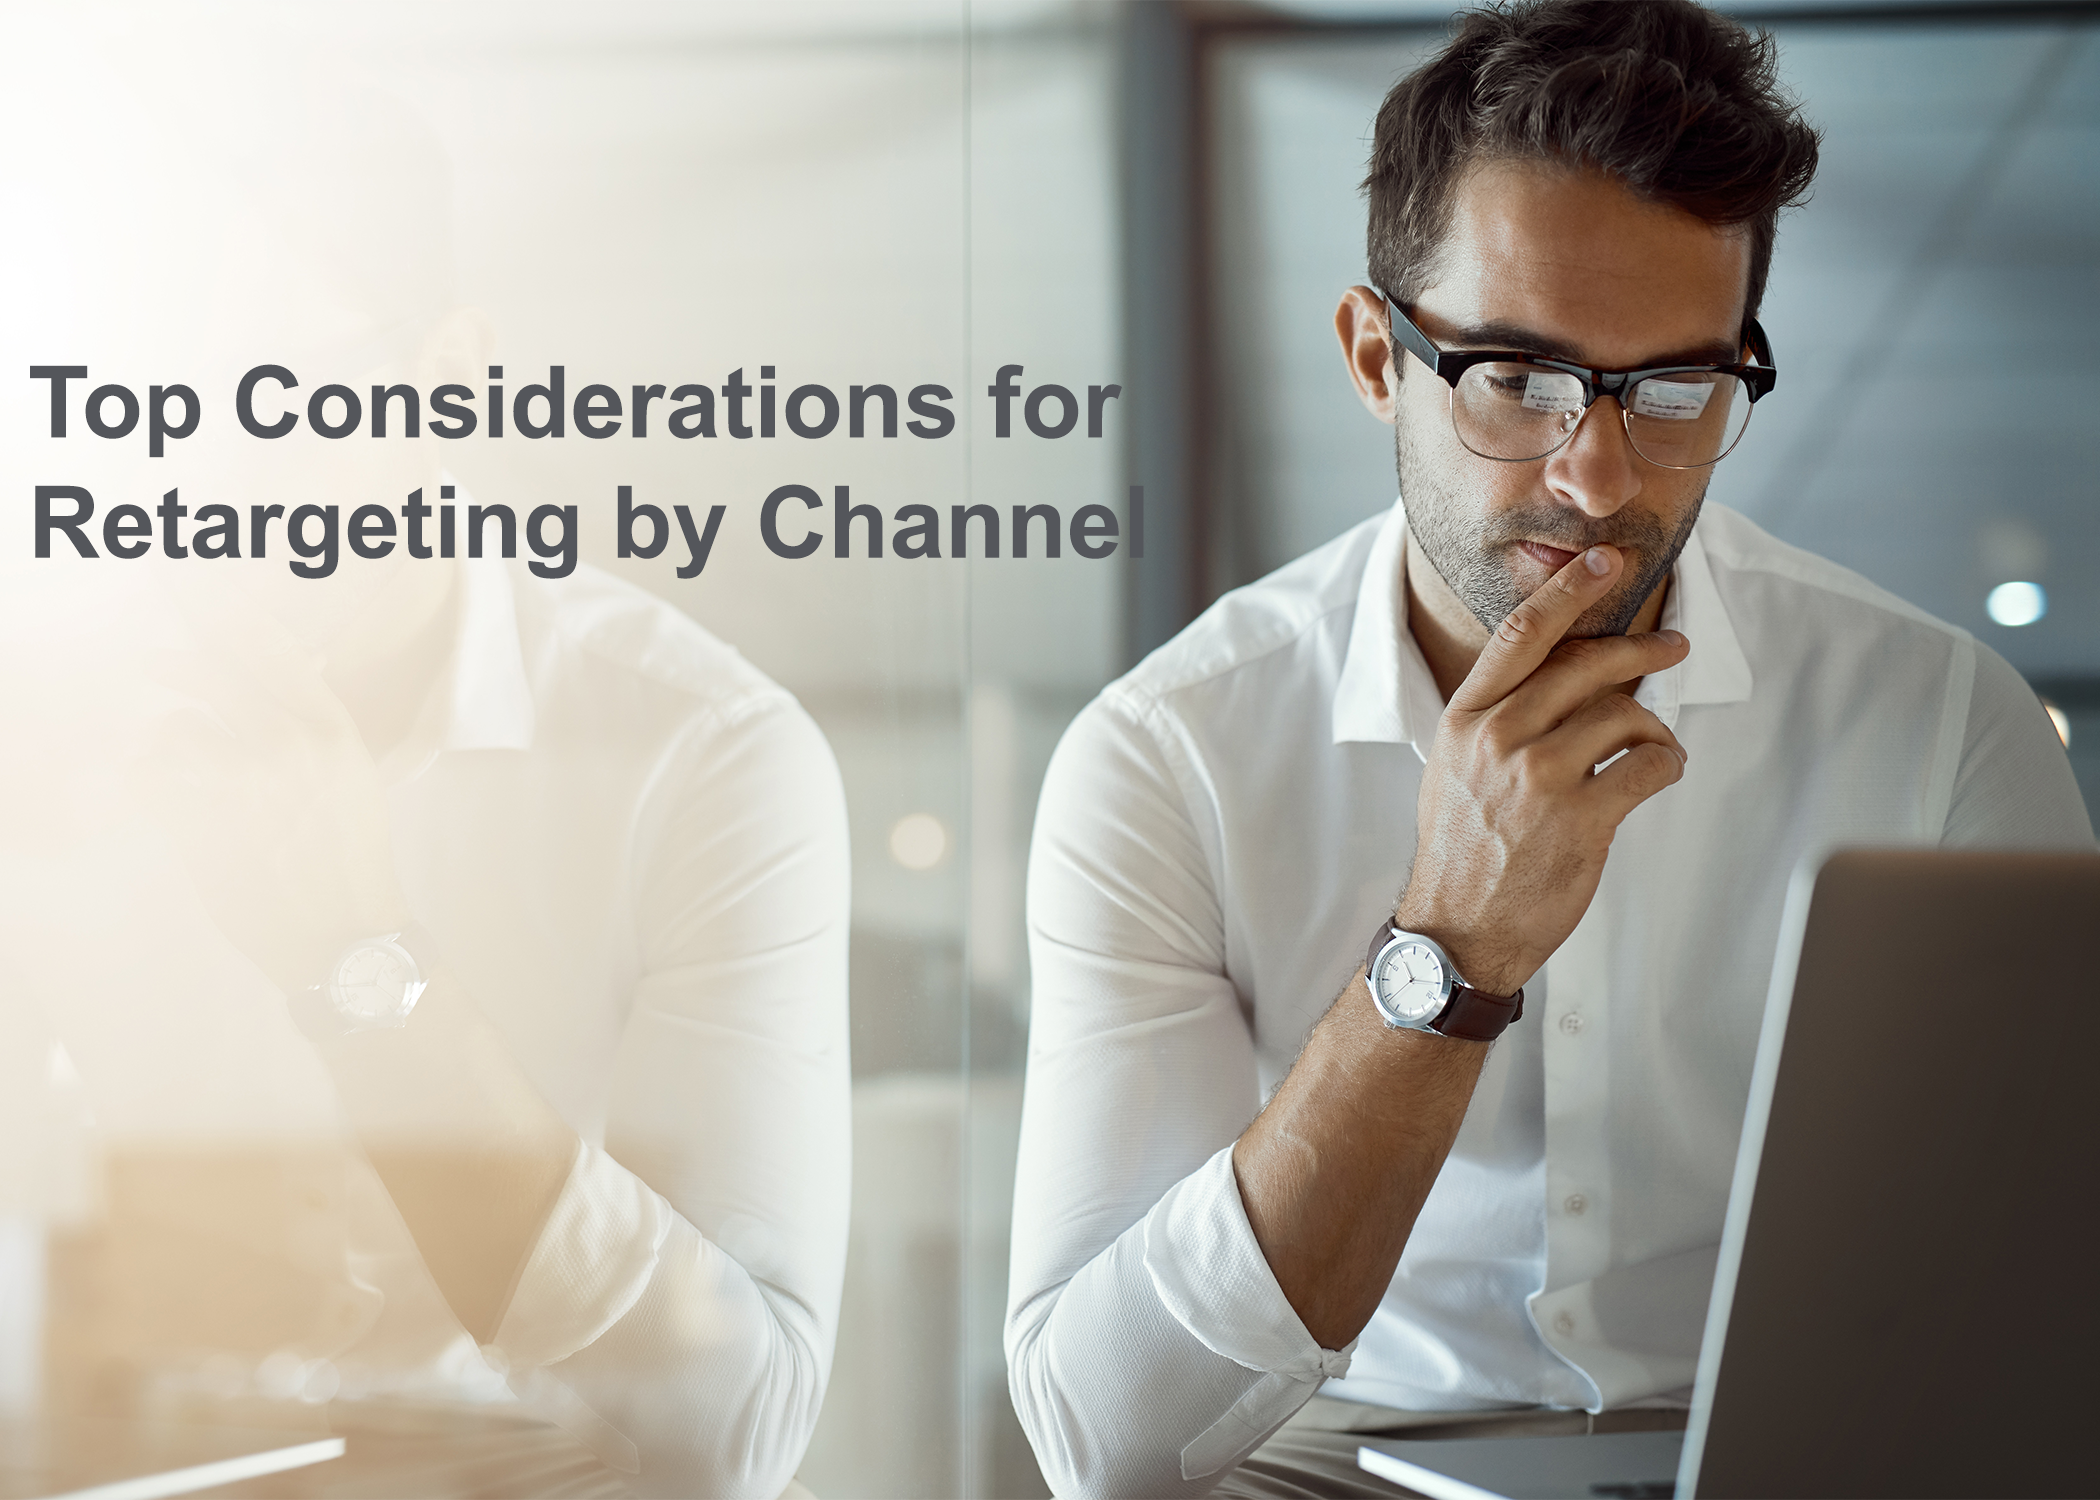 Top Considerations for Retargeting by Channel